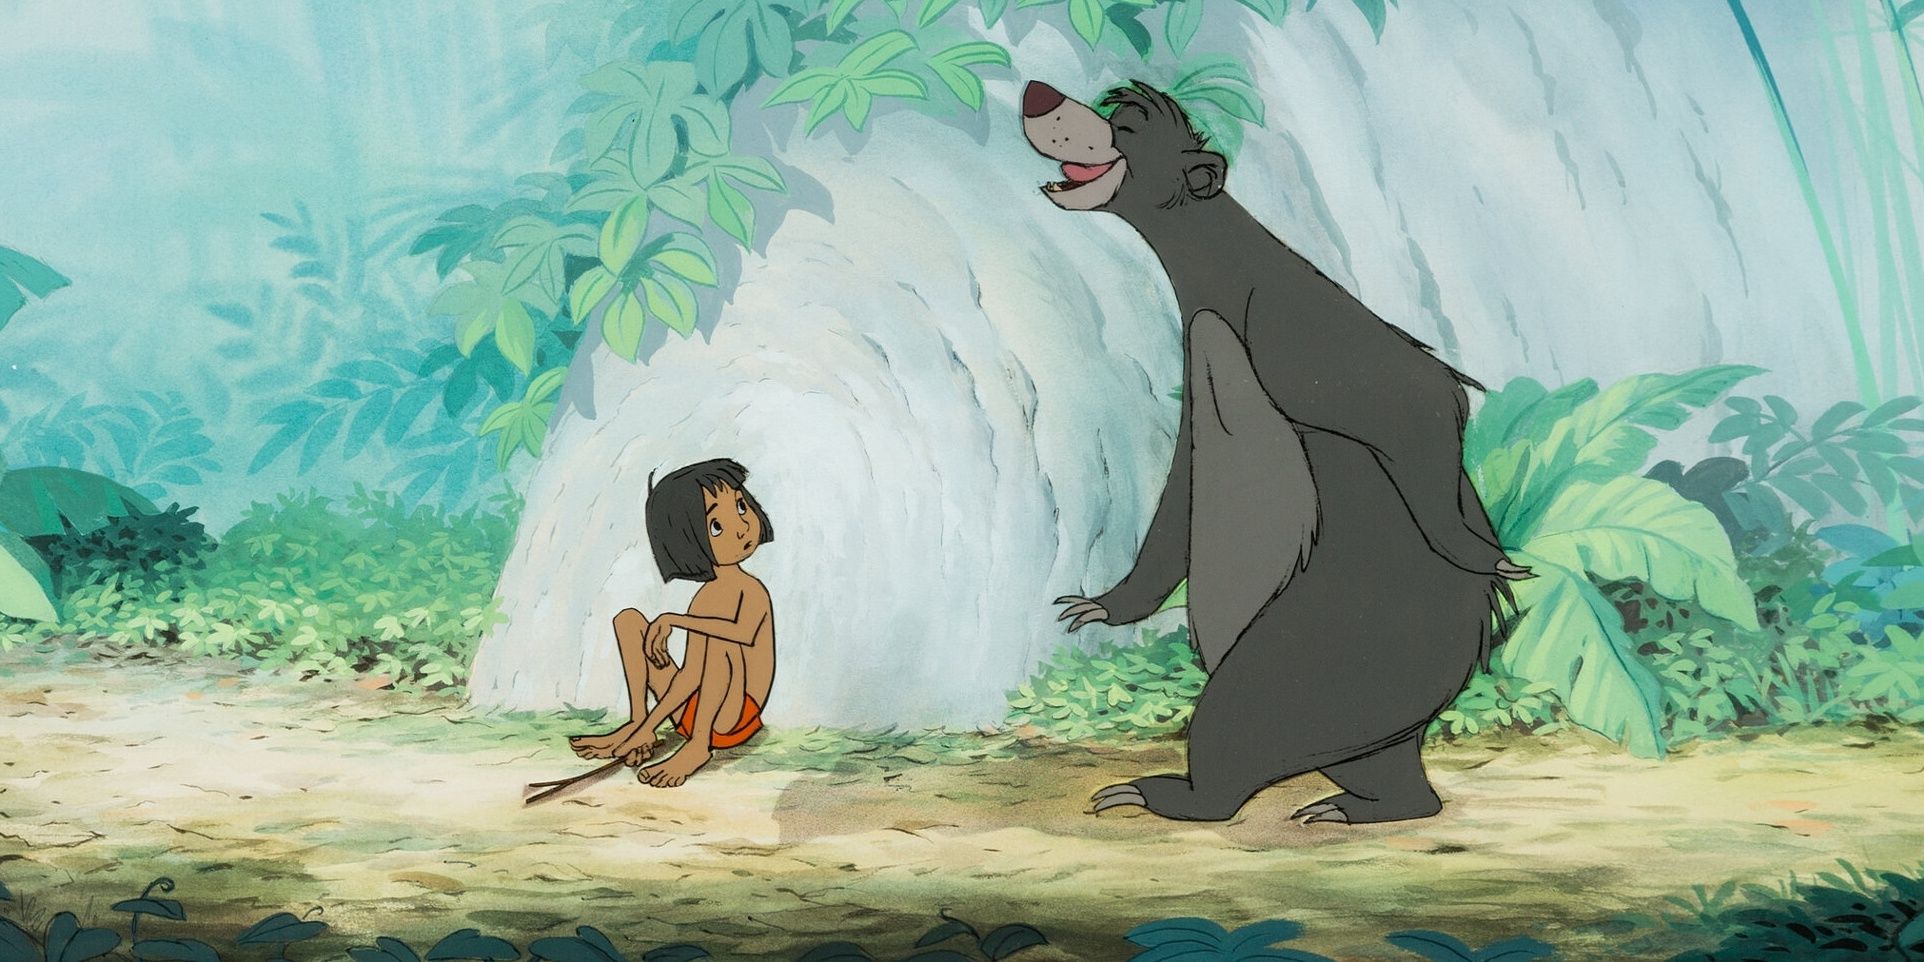 Mowgli and Baloo from The Jungle Book.